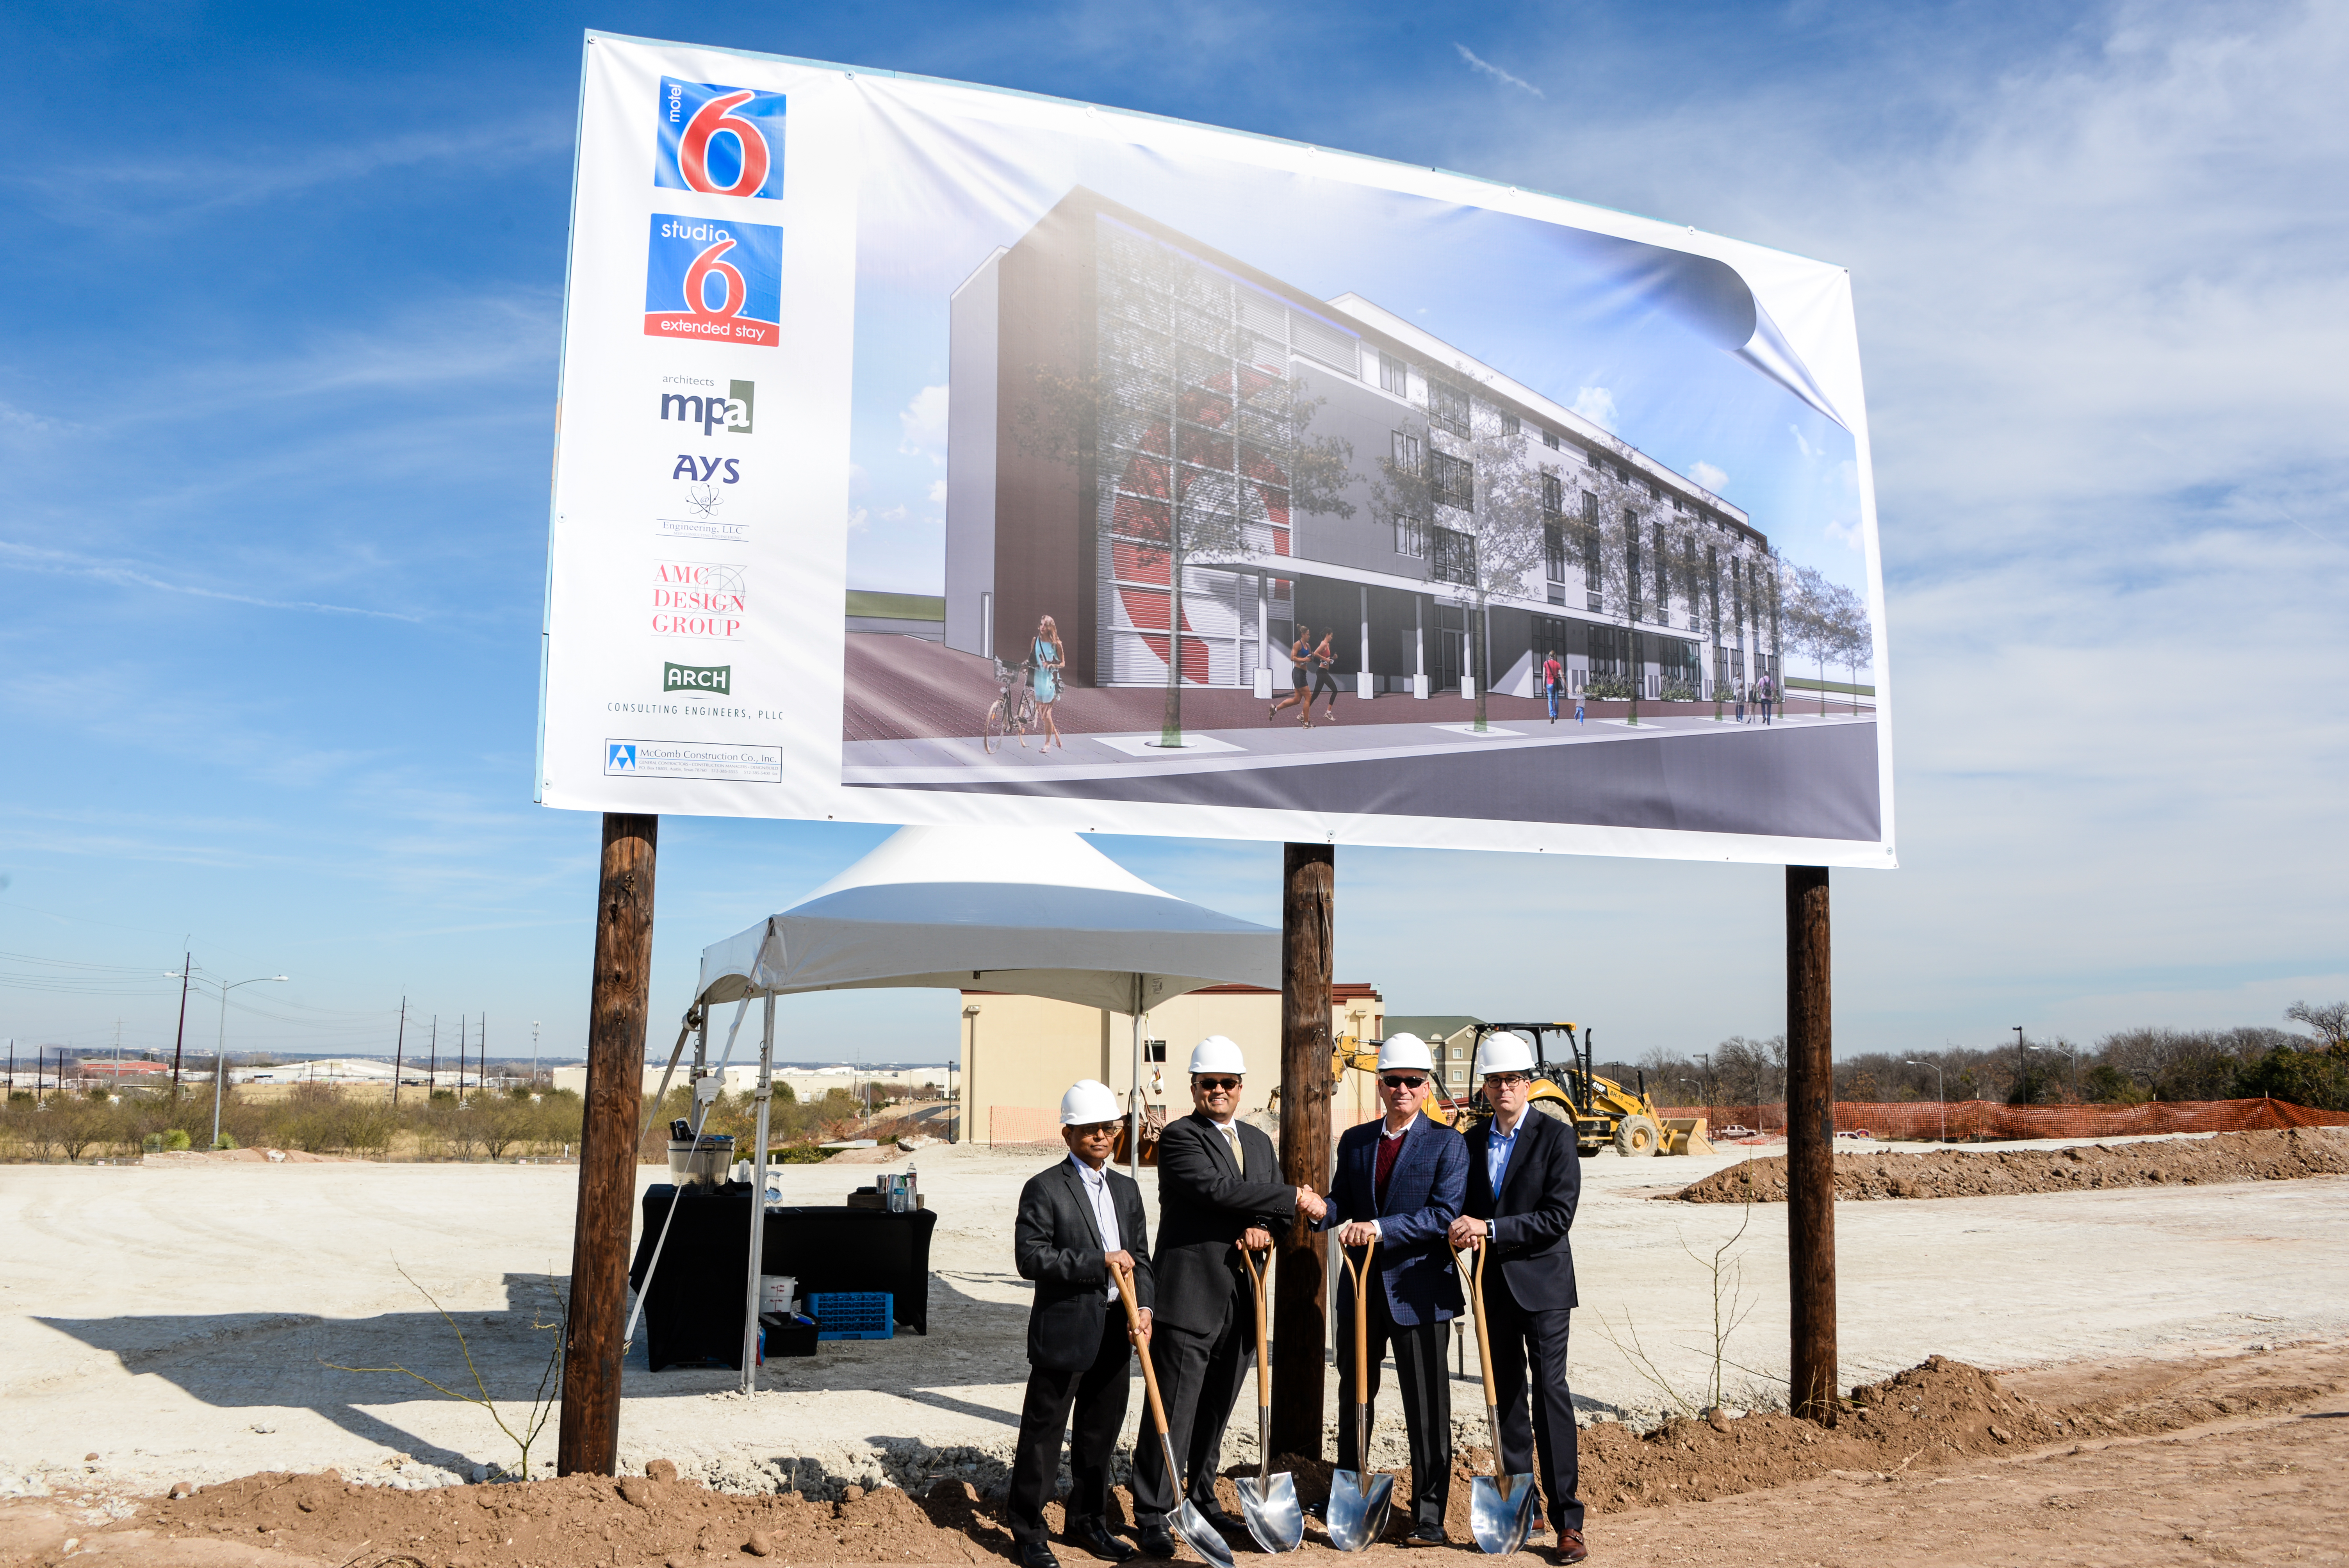 The new property will have both Studio 6 and Motel 6 brand offerings in the same location and is currently slated for comple